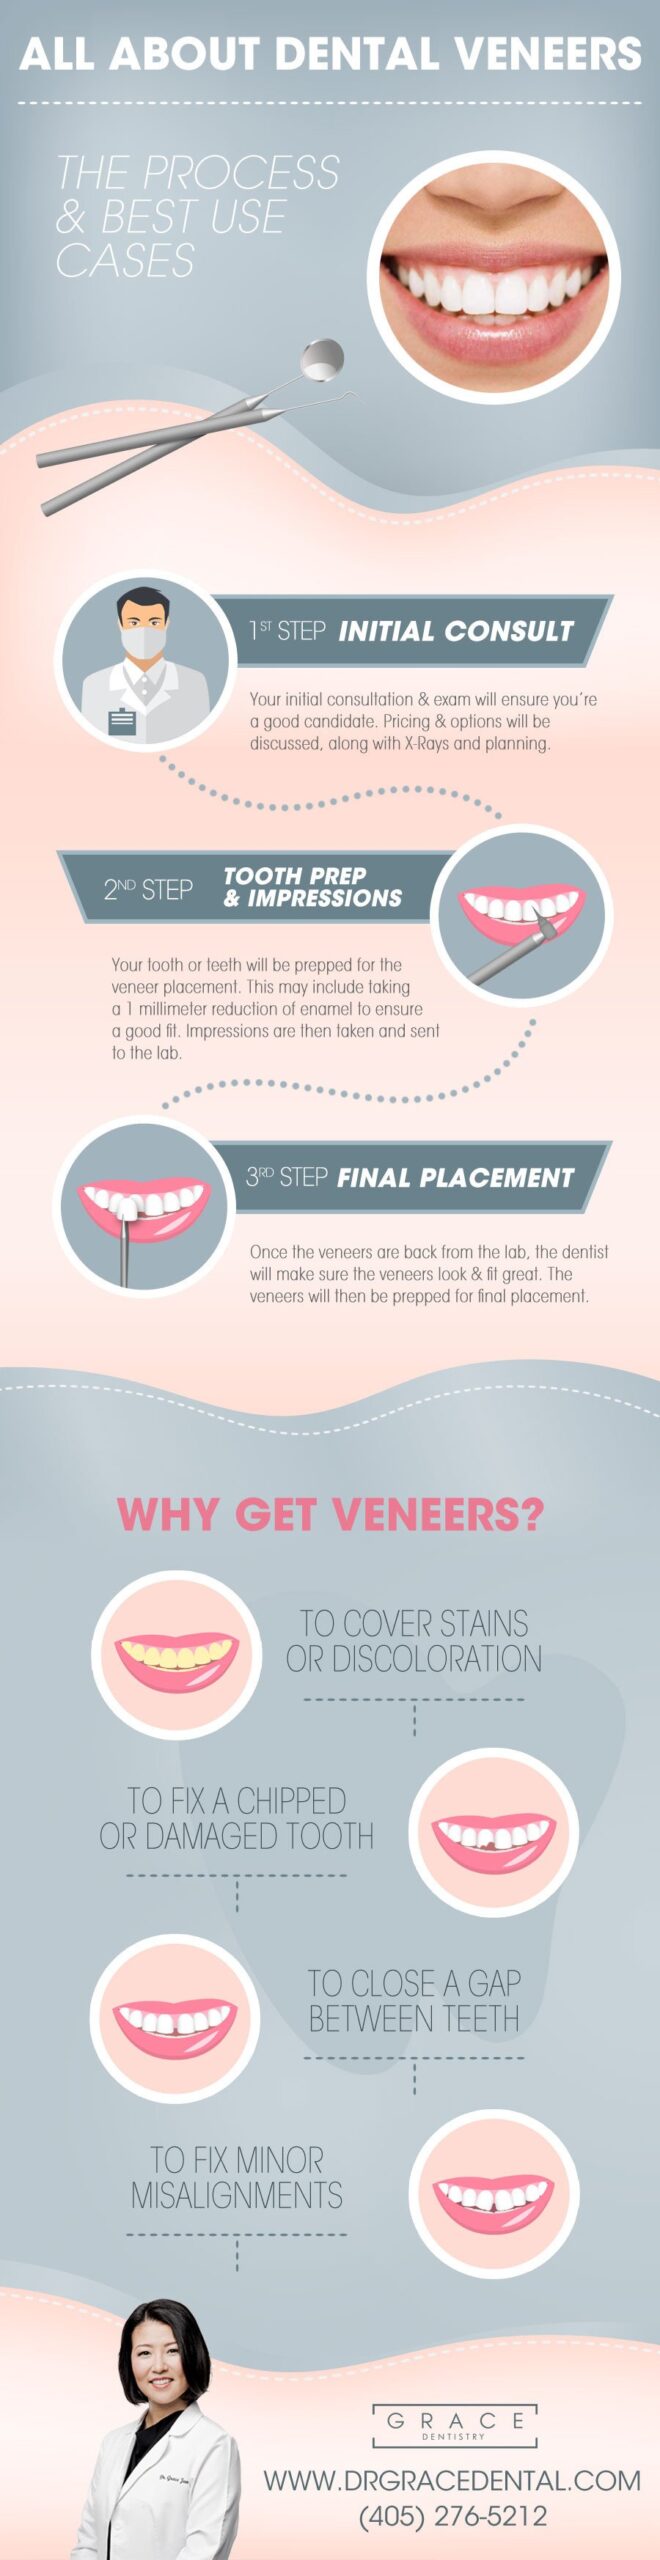 Porcelain Veneers Process & Best Use Cases Infographic